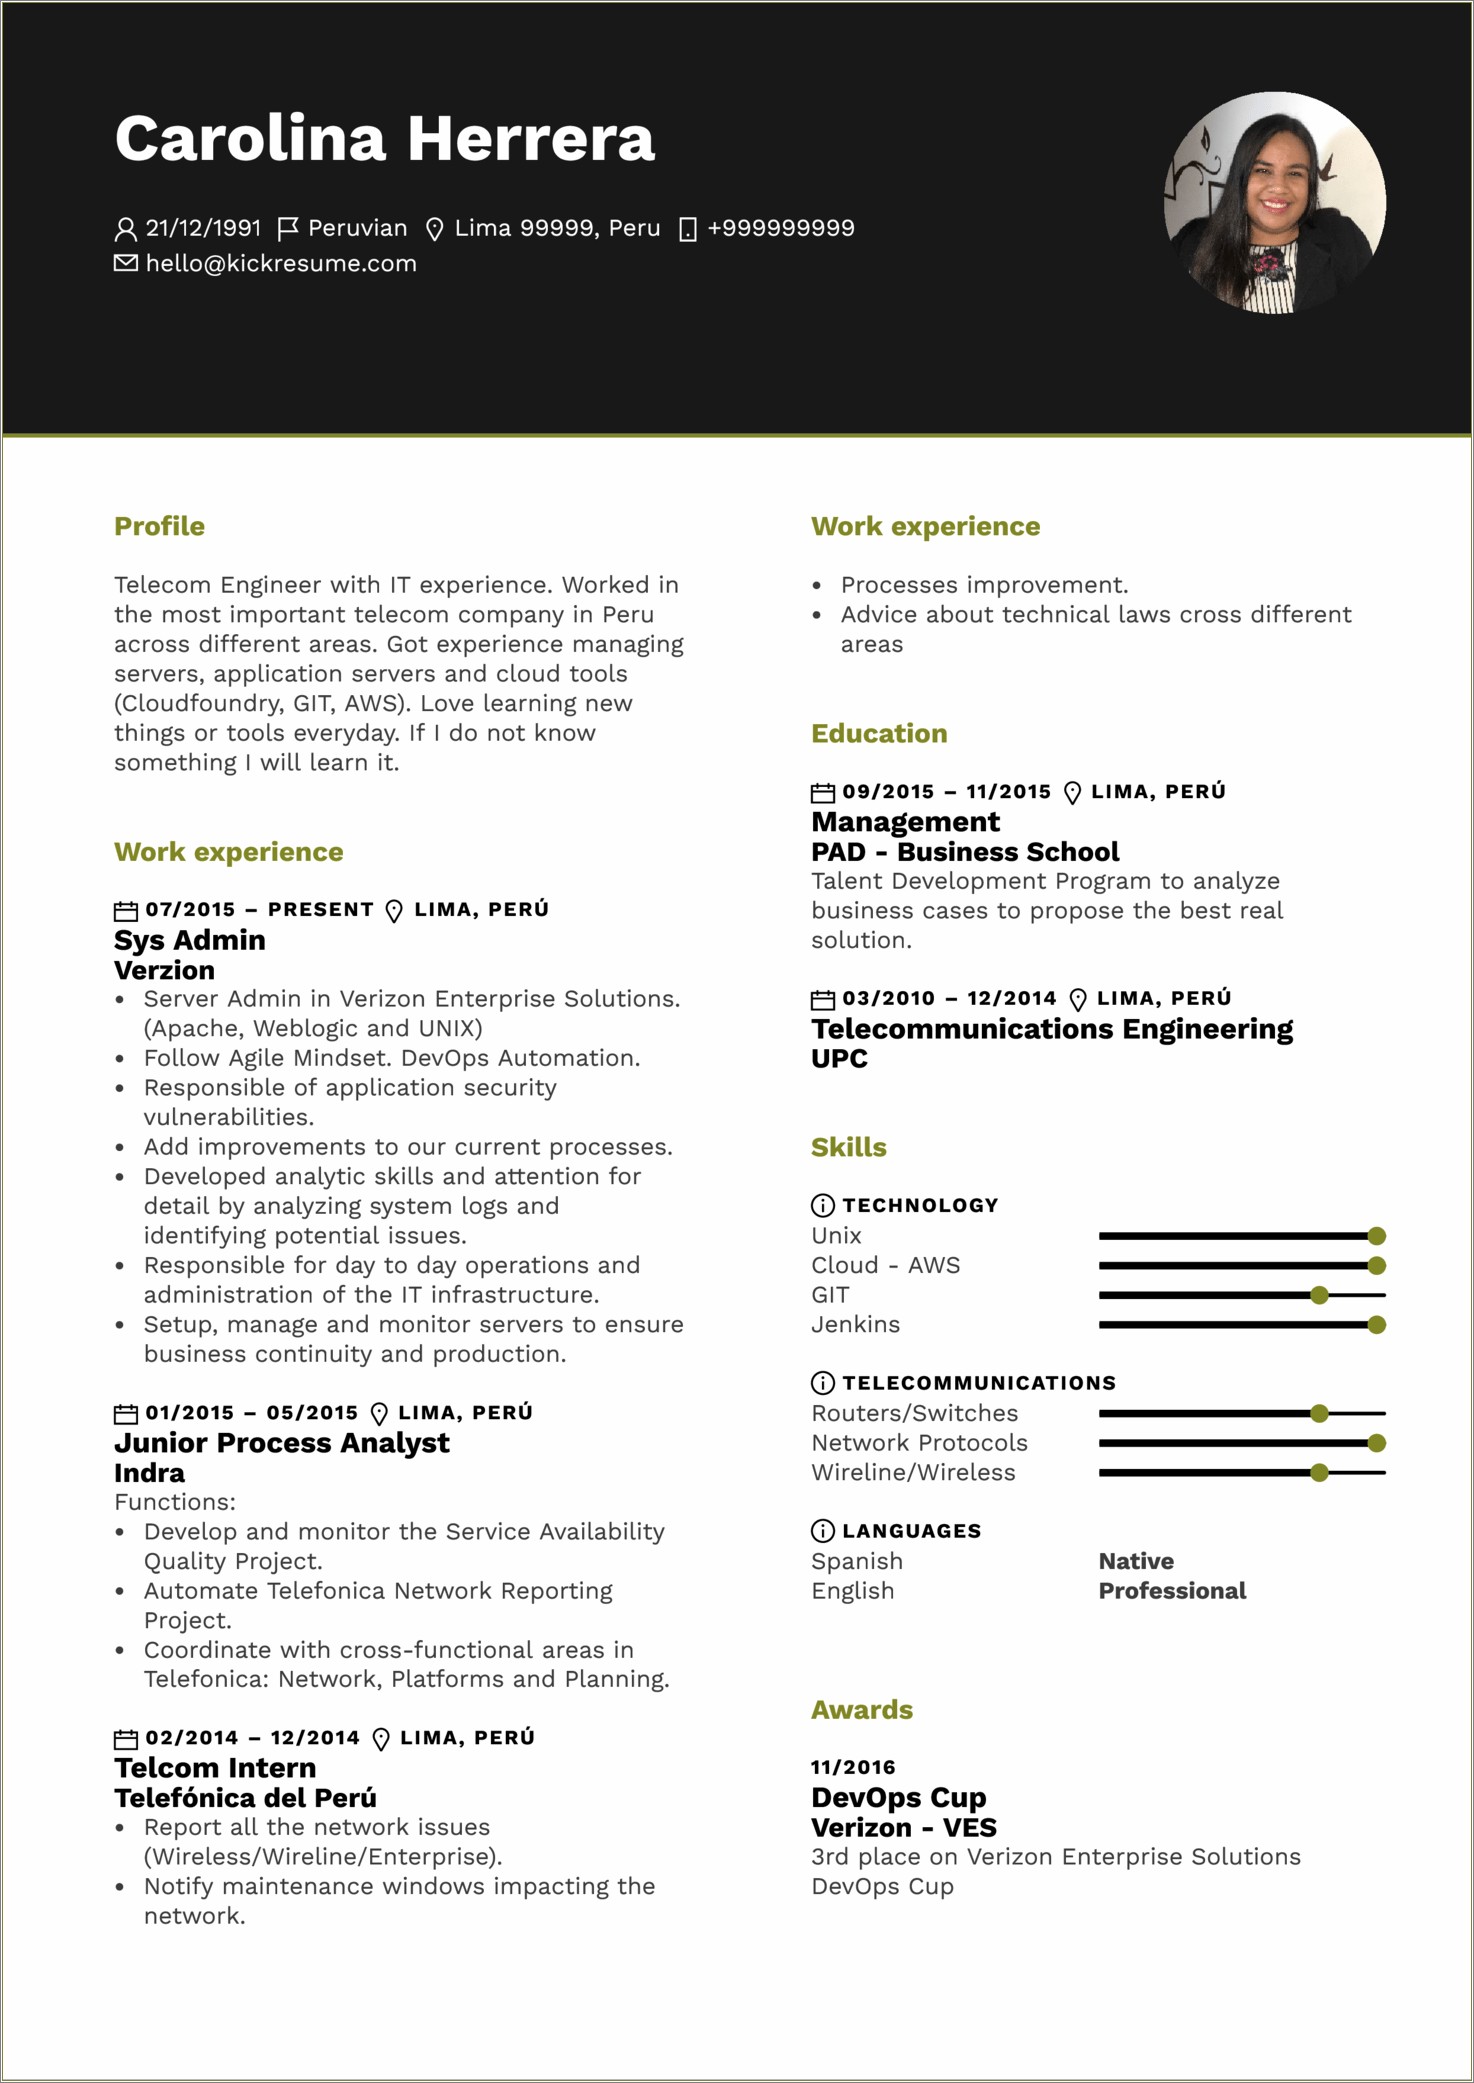 Example Of Resume To Apply Job Enginner Systems